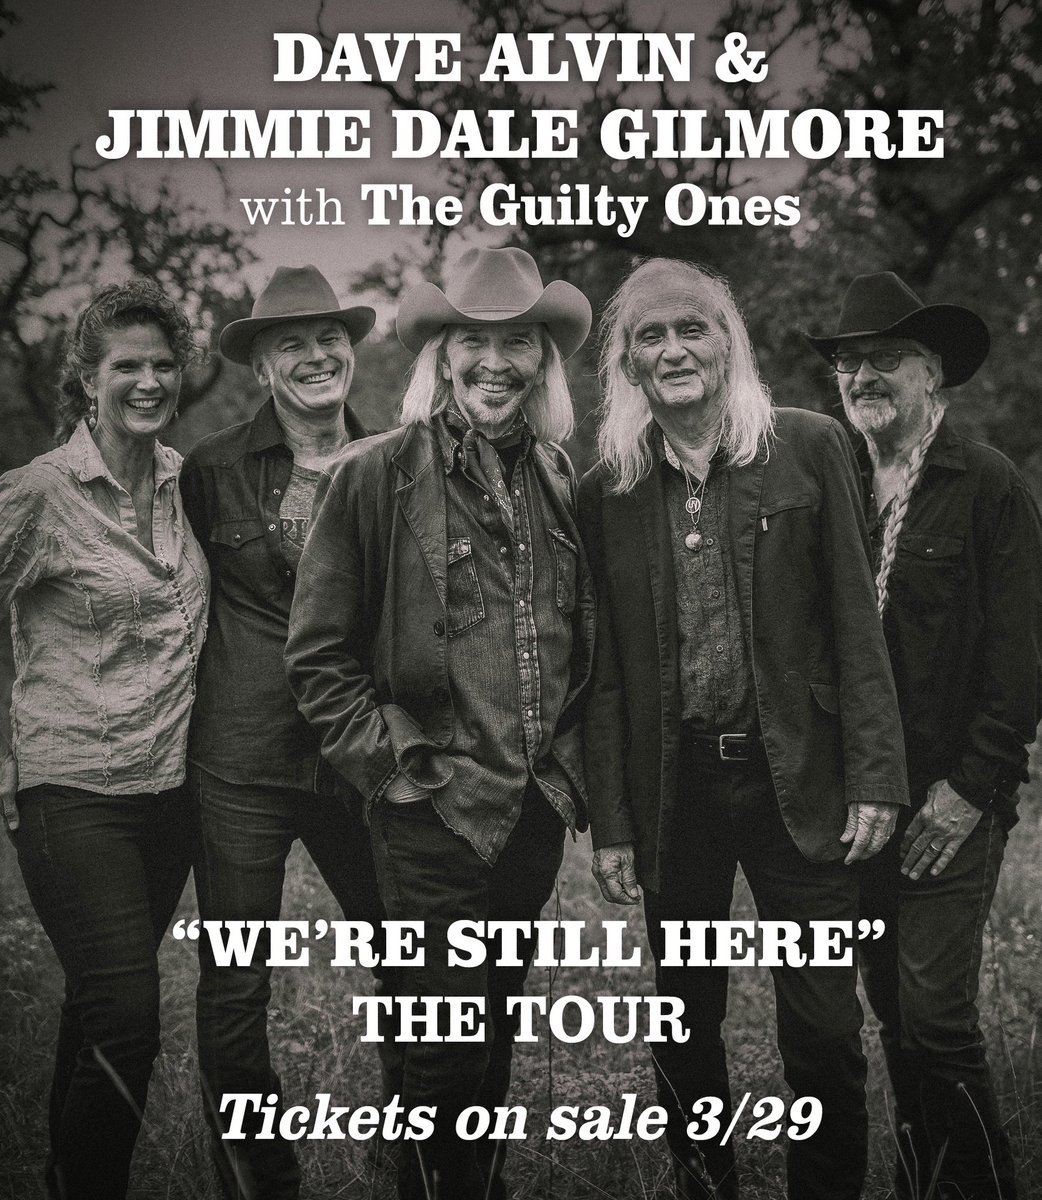 ⭐️ DAVE ALVIN & JIMMIE DALE GILMORE with The Guilty Ones “We’re Still Here” Tour is on sale now! ⭐️ Head over to davealvin.net/tour for ticket links... and STAY TUNED, more dates will be added soon!! @jimmiedgilmore